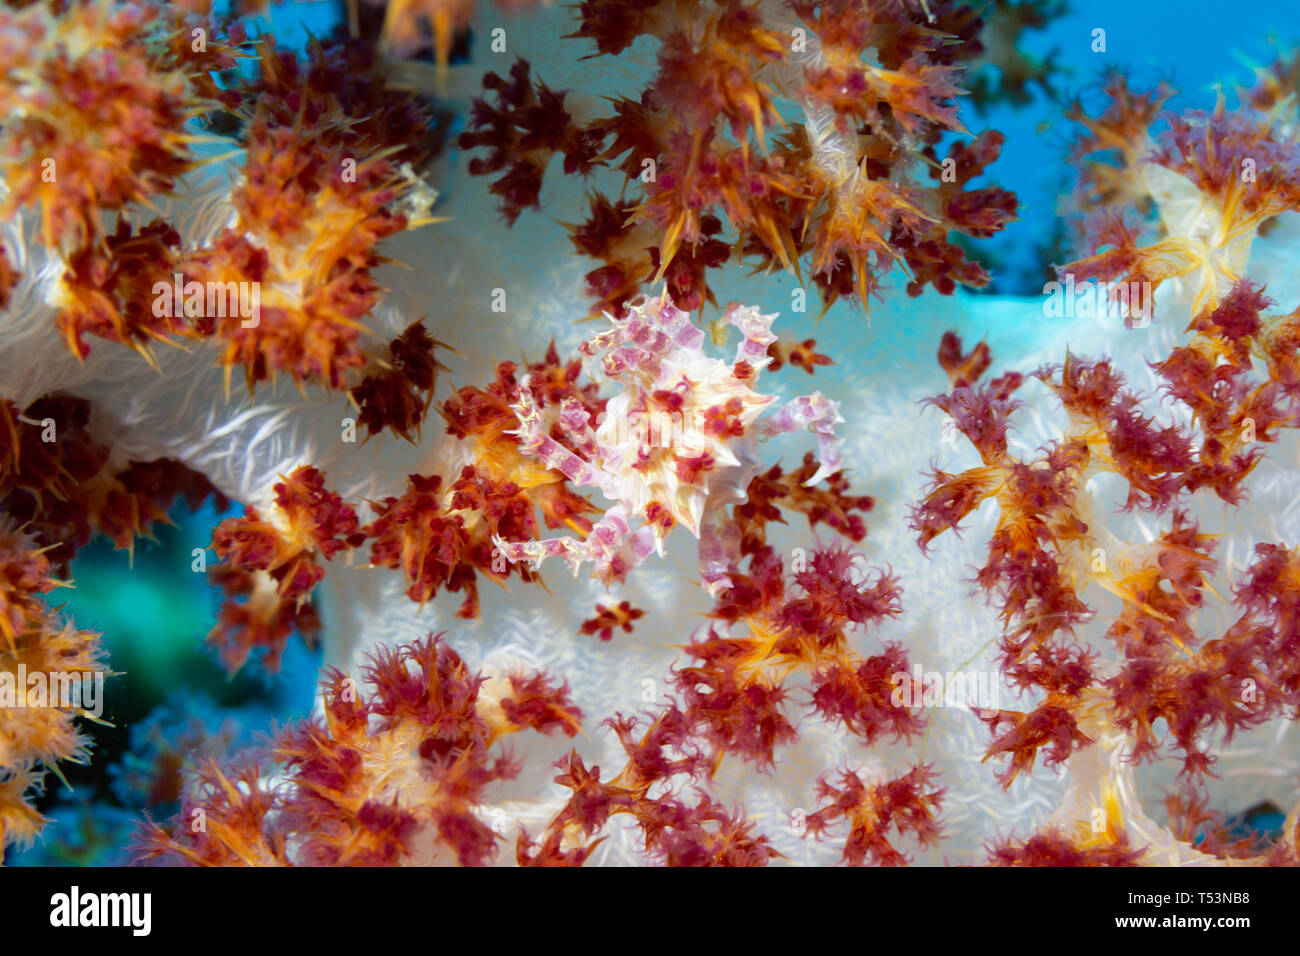 Soft Coral Crab or Candy Crab, Hoplophrys oatesii, hidden by camoflouged on tree coral polyps, Carnation Tree Coral or Dendronephthya Carnation, Stock Photo